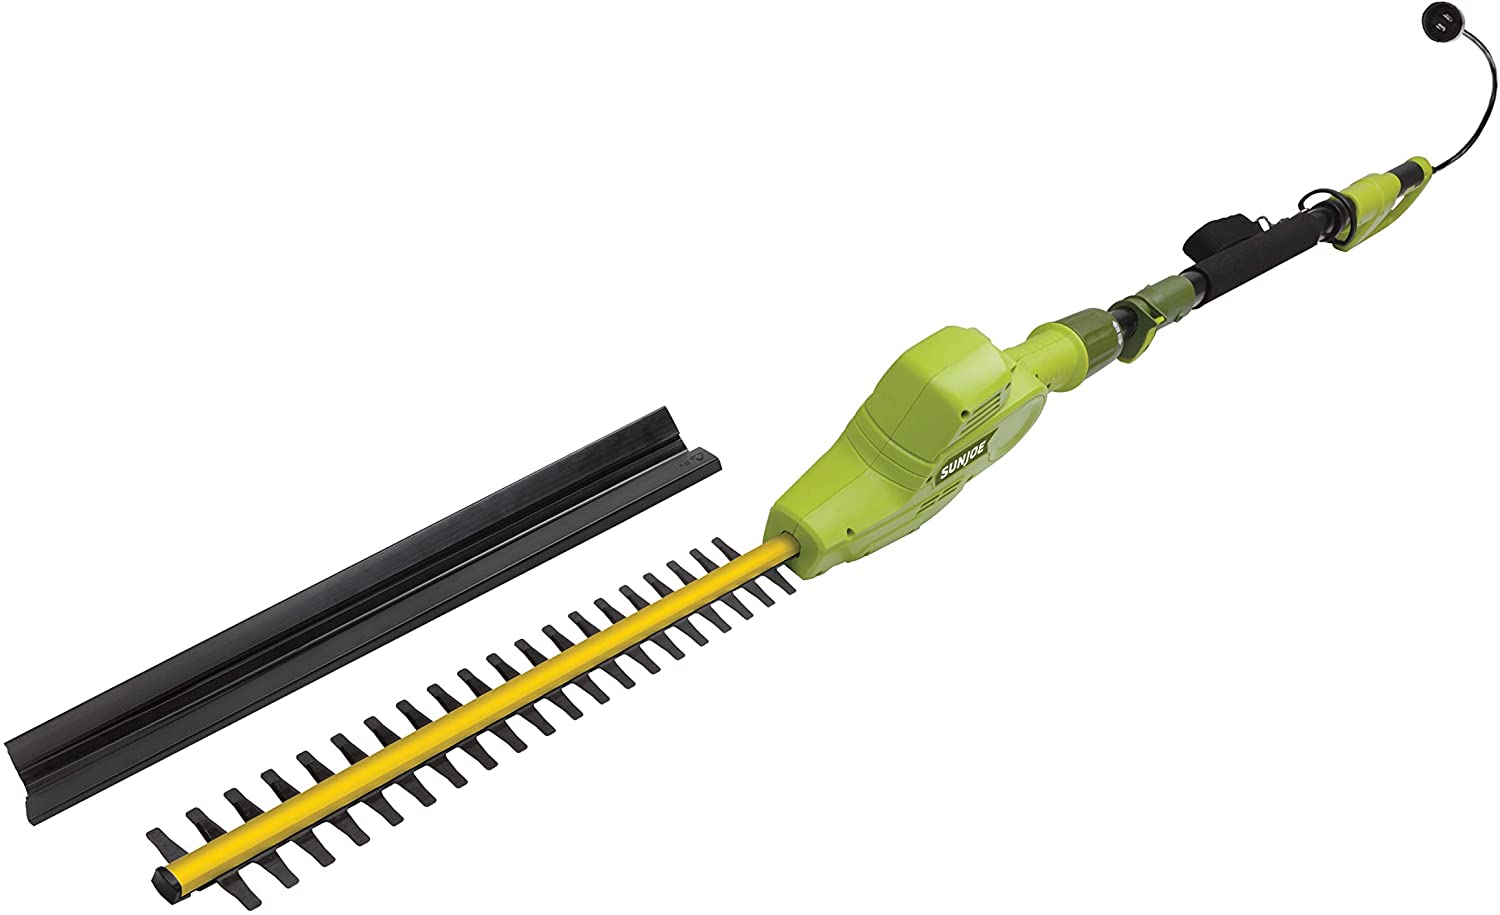 corded pole hedge trimmer